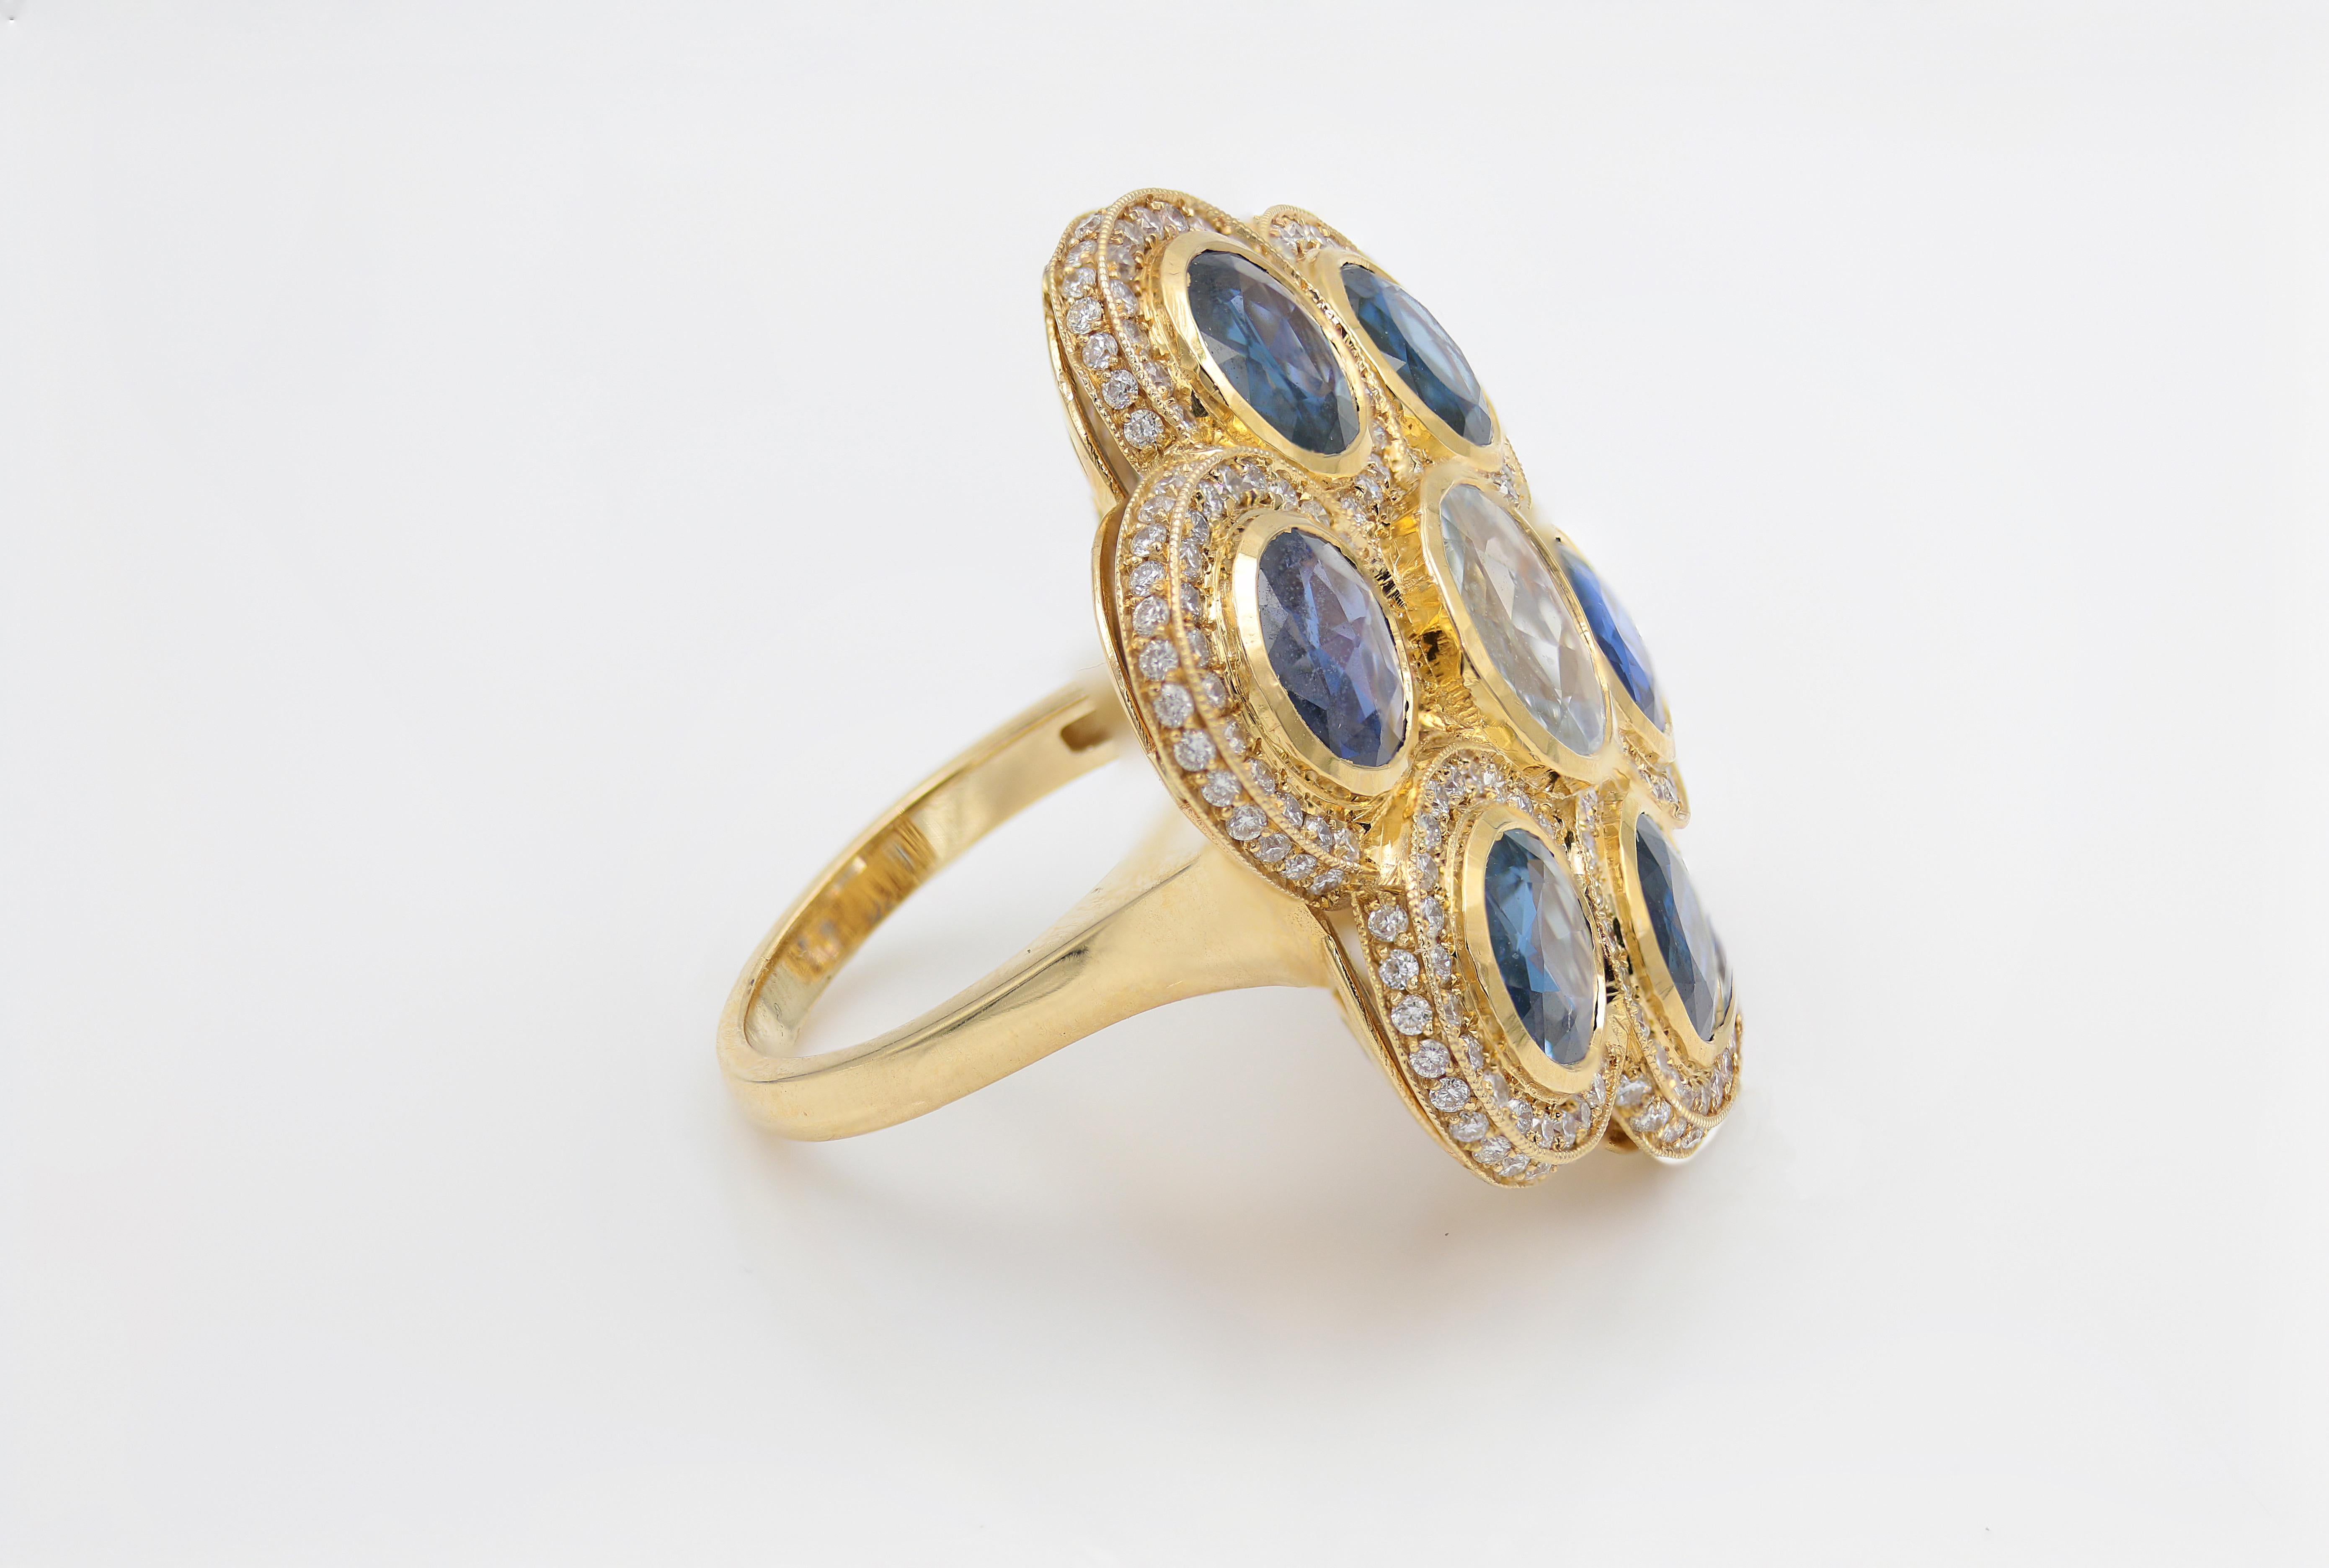 Elevate your look with this stunning cocktail ring! Set in a flower inspired setting with a 14k gold band is a rose cut White Sapphire with 6 rose cut Blue Sapphires around it for a total of 8.6 carat. Encrusting the bezel is approximately 210 G